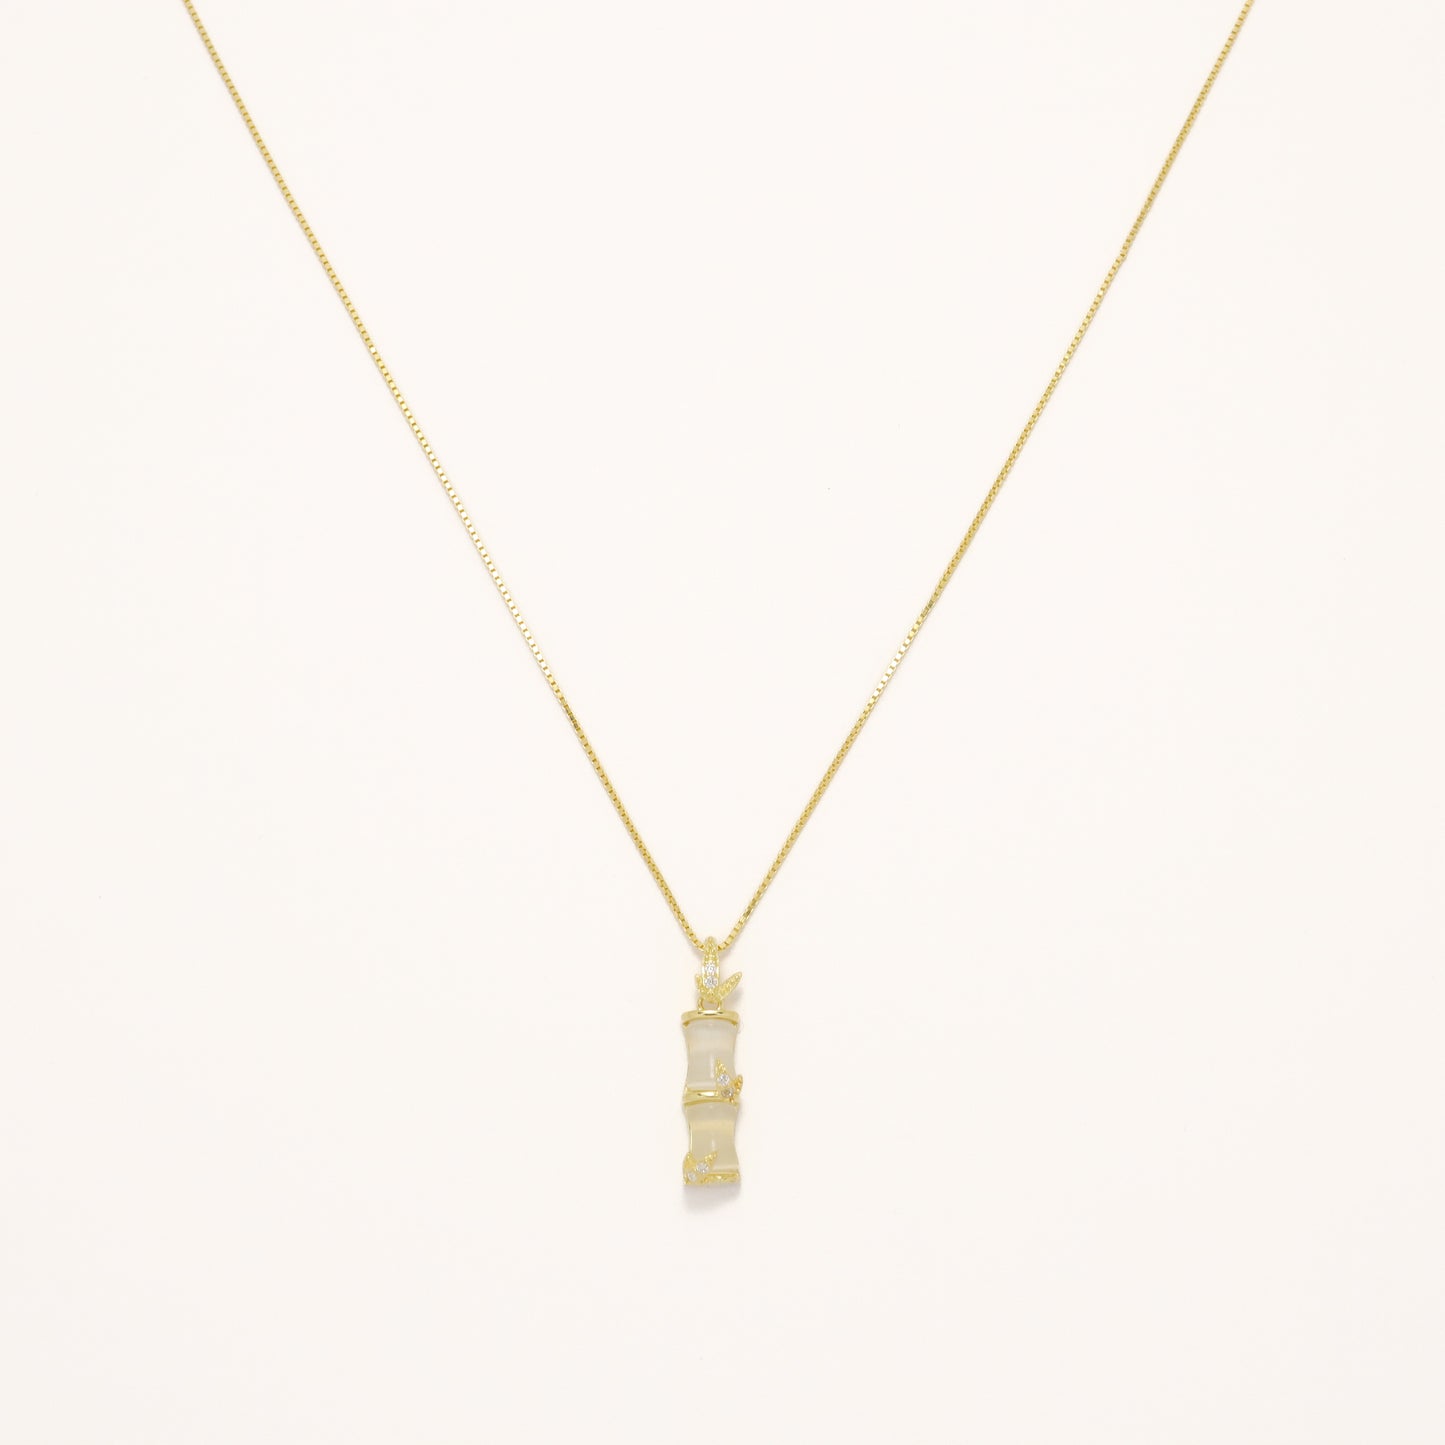 Fortune Bamboo - S925 Sterling Silver Necklace (Color: Gold)